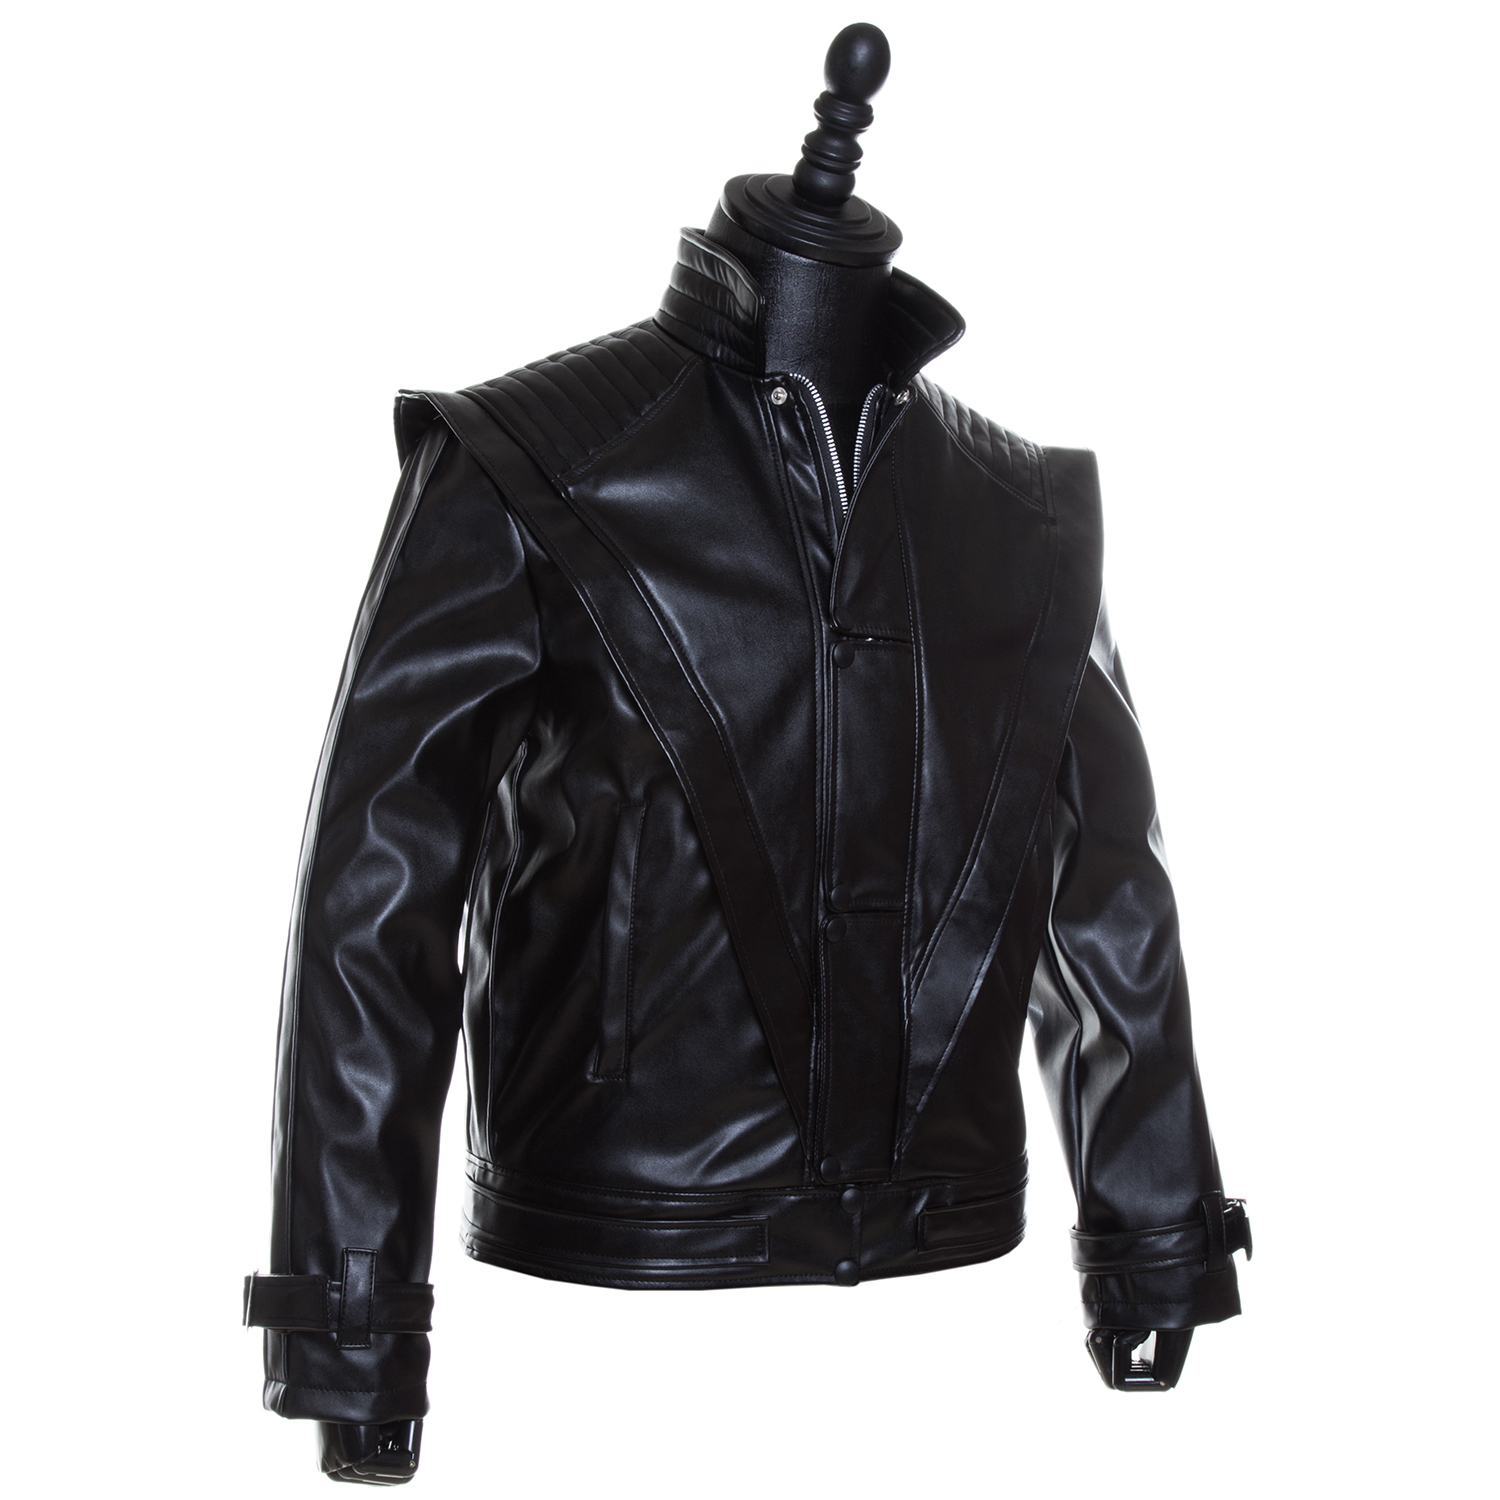 Michael Jackson Thriller Jacket in Real Leather - All Sizes